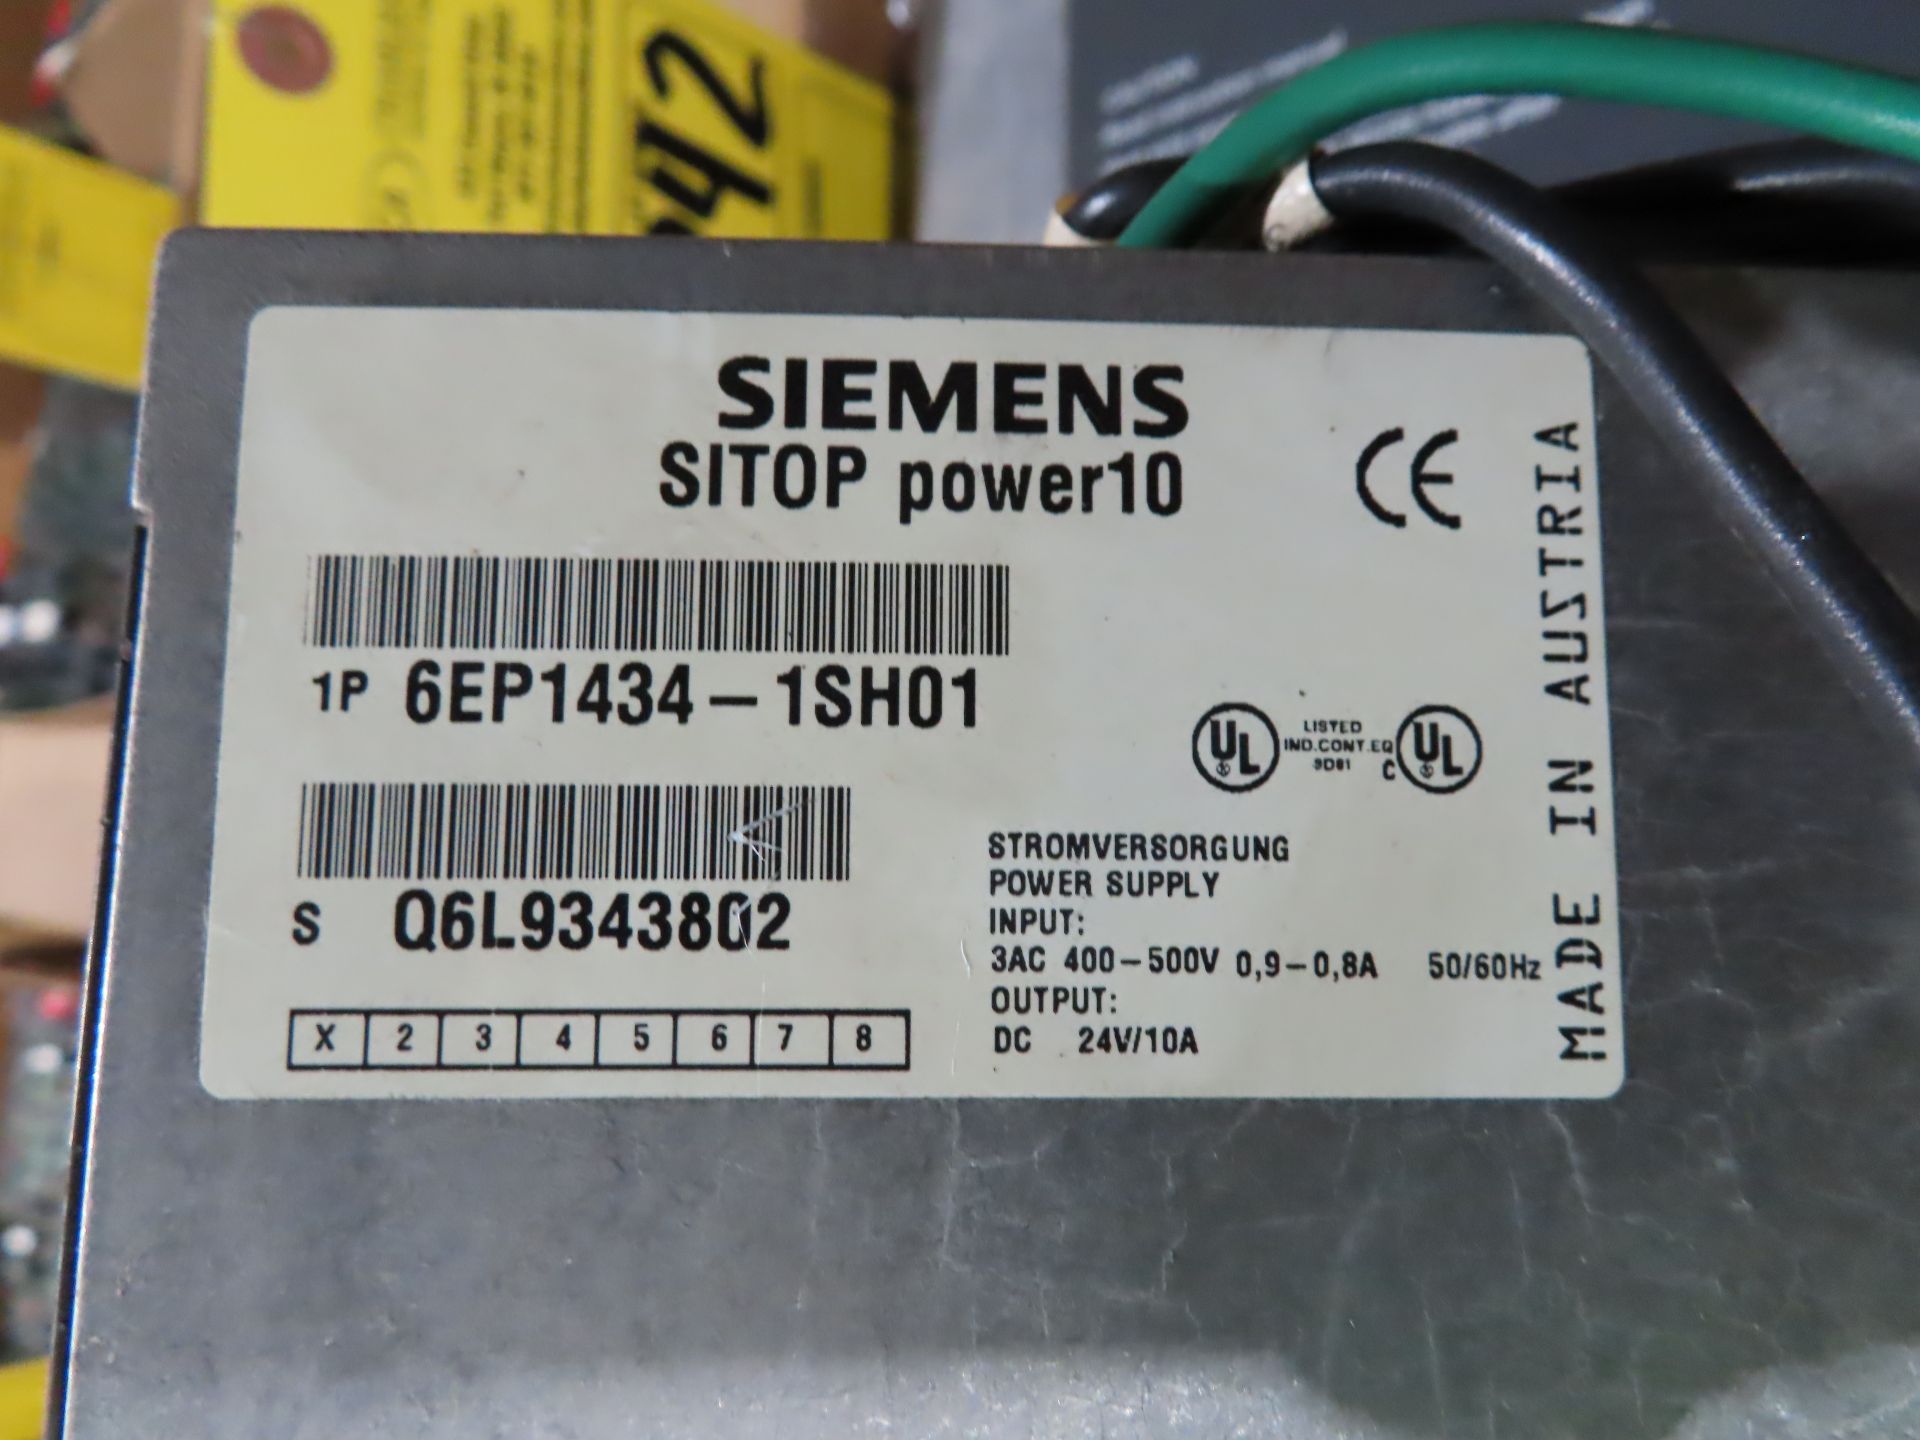 Siemens model 6EP1434-1SH01 power supply, as always, with Brolyn LLC auctions, all lots can be - Image 2 of 2